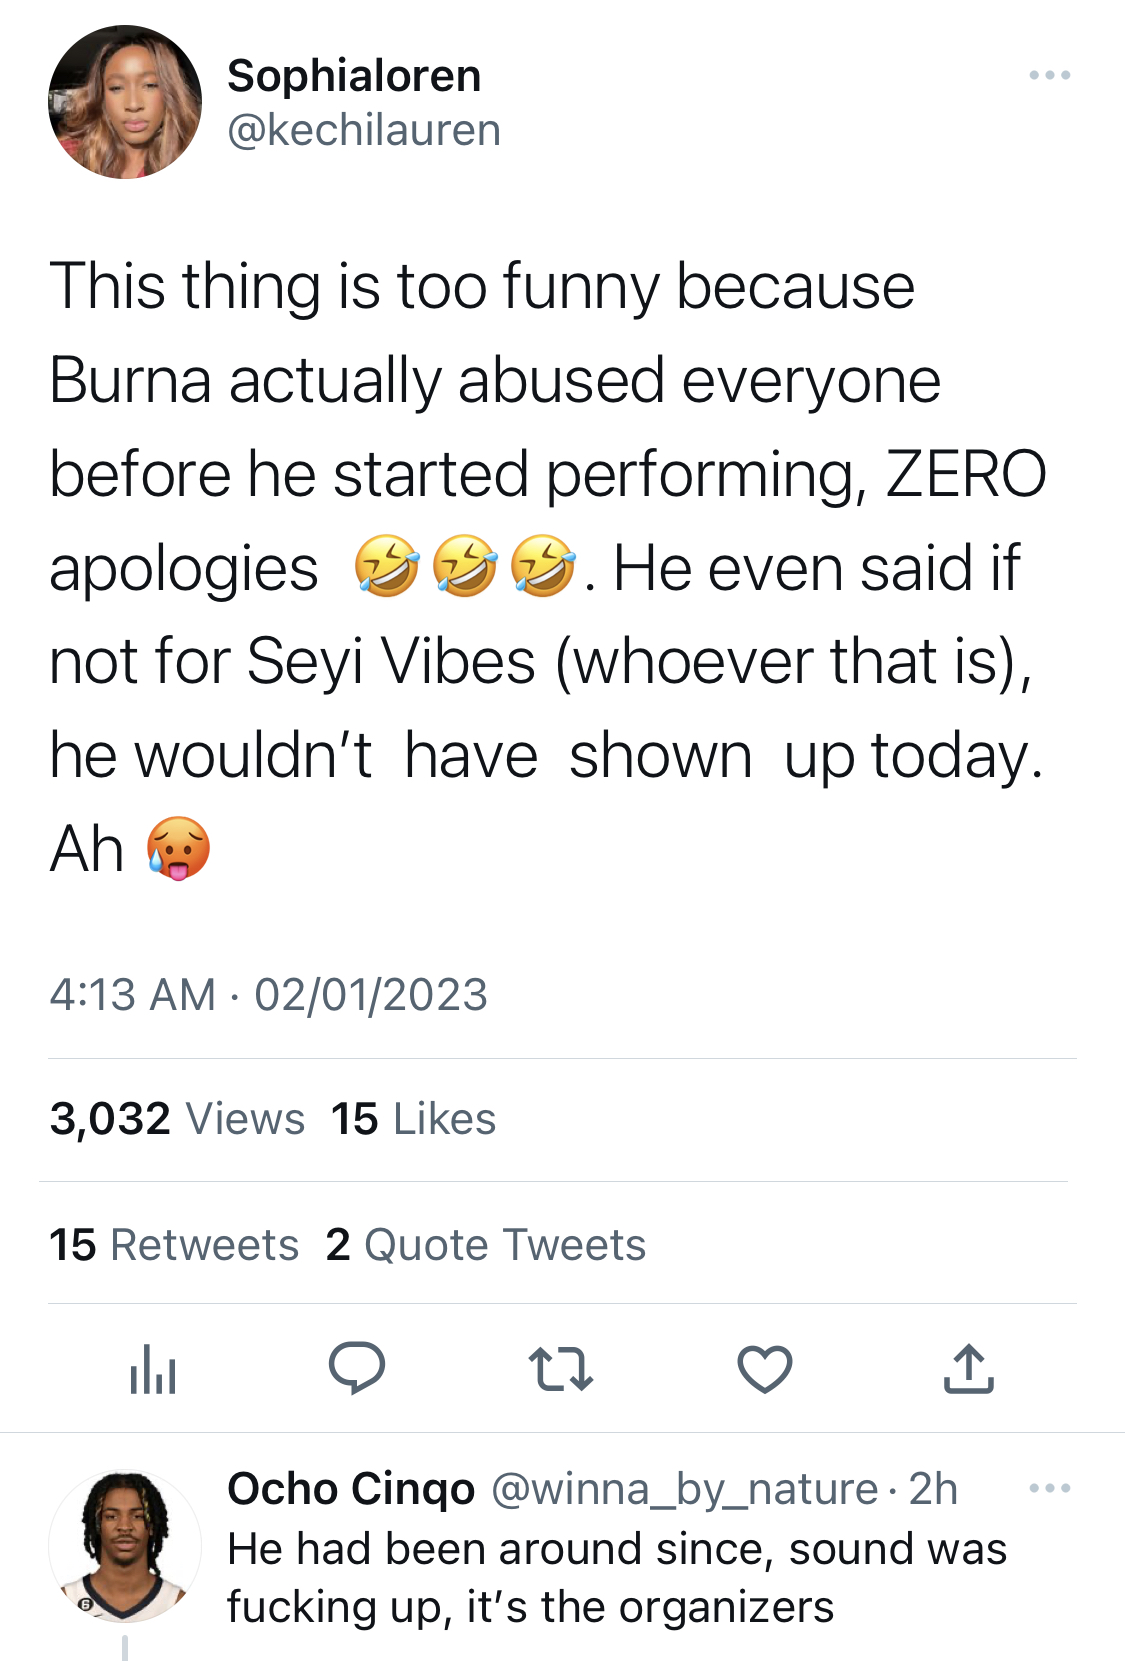 Burna Boy blasts fans after keeping them waiting 7 hours for concert in Lagos [videos]